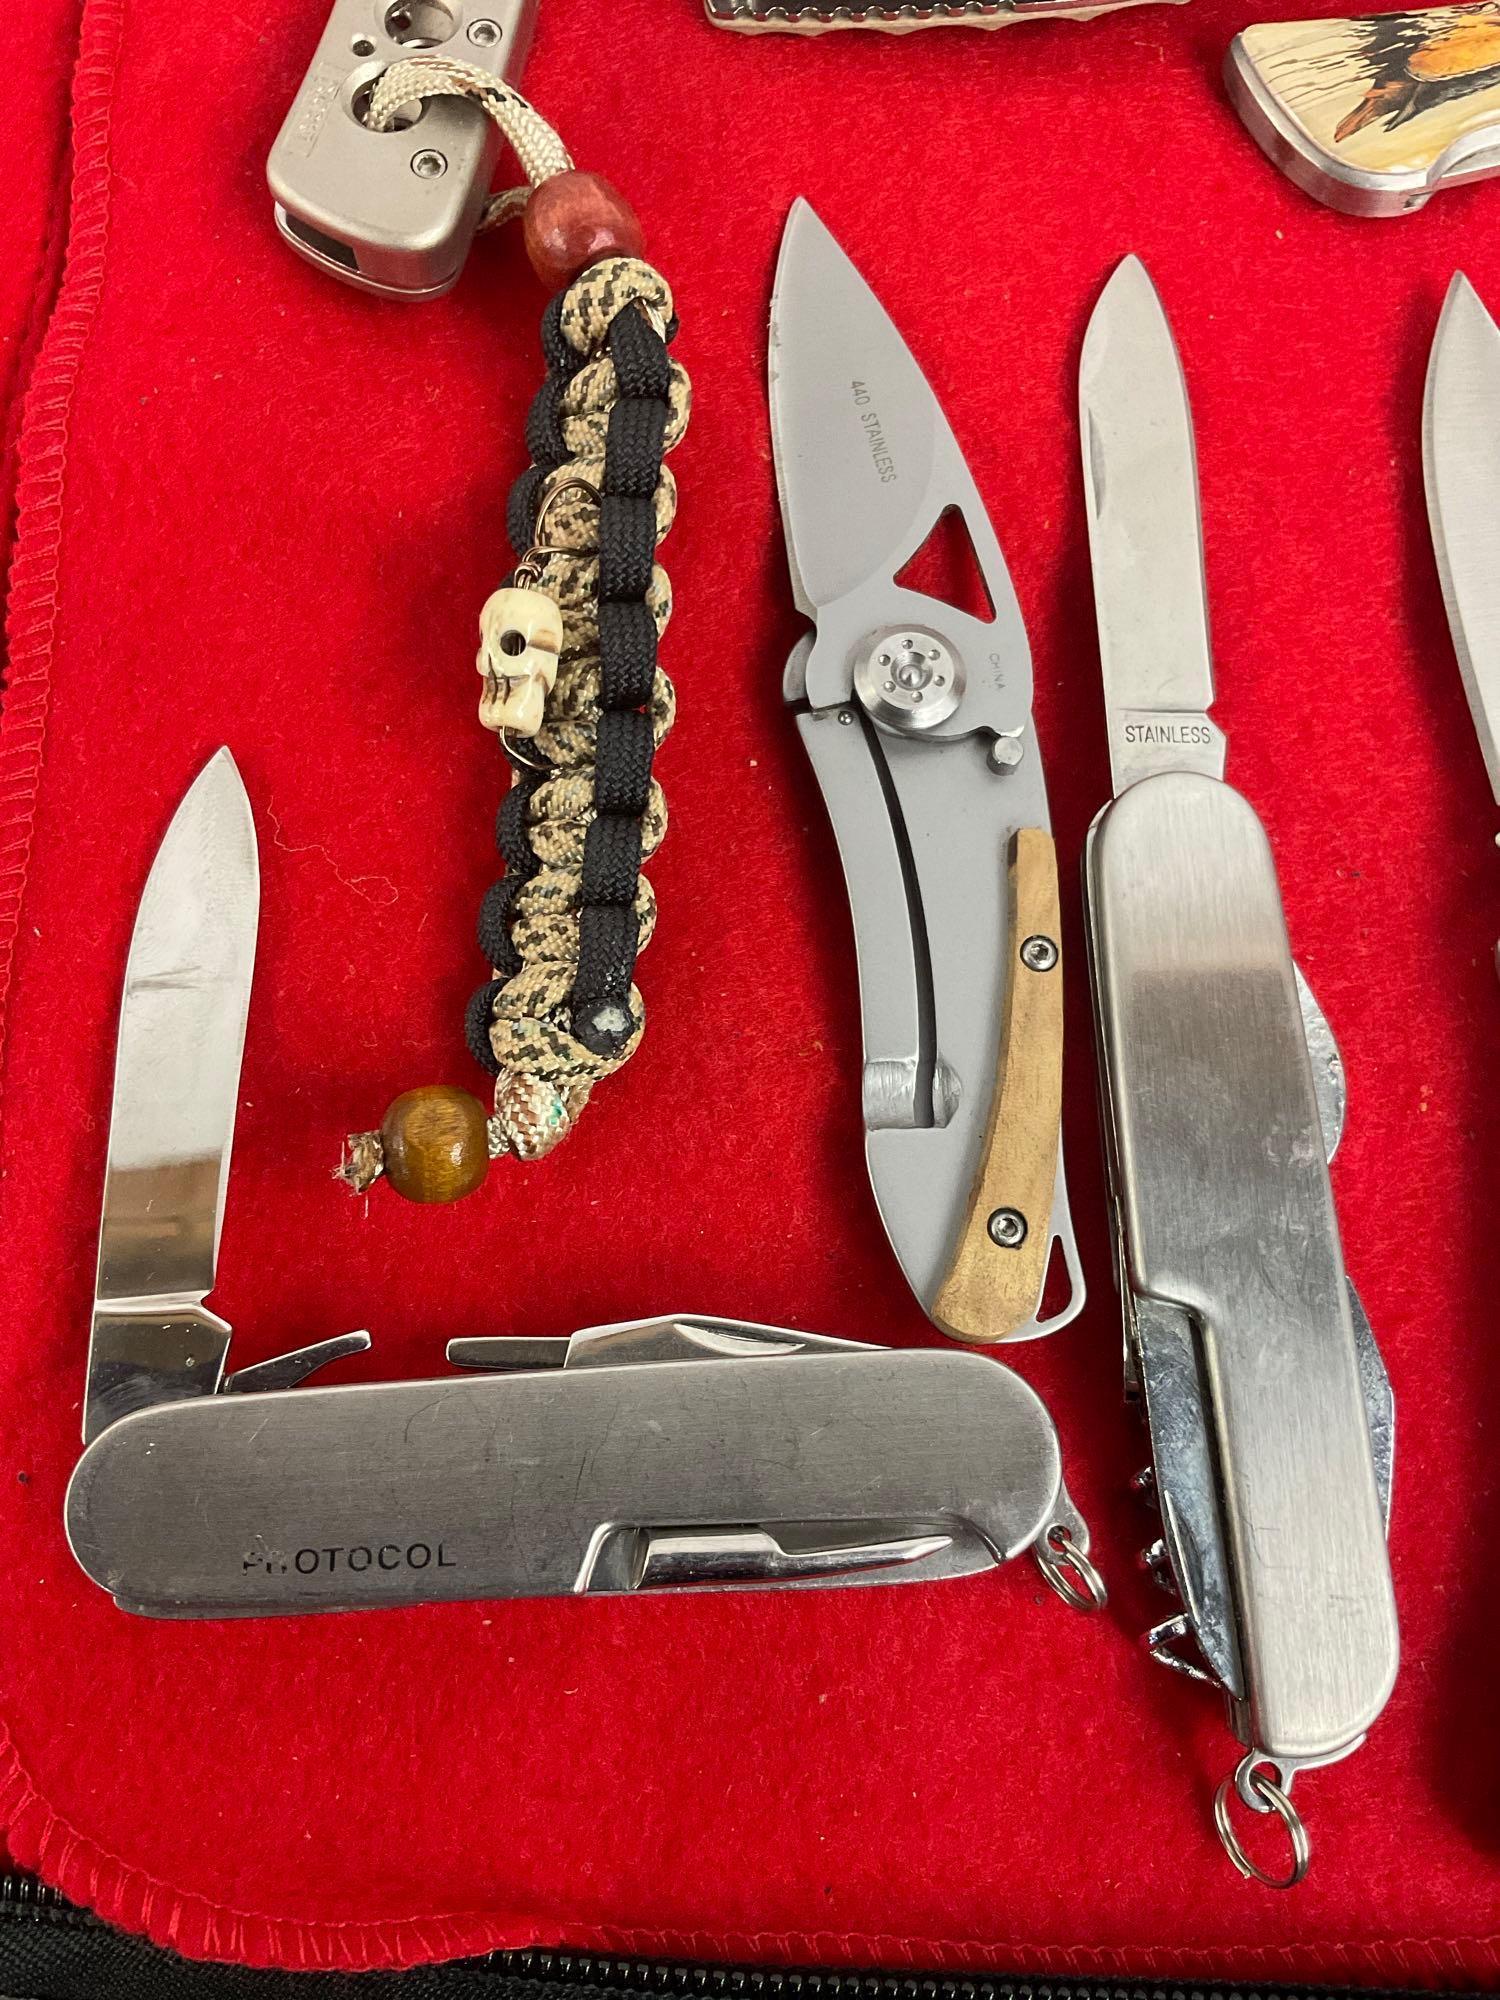 Collection of 8 Unmarked Stainless Steel Folding Blade Pocket Knives - See pics